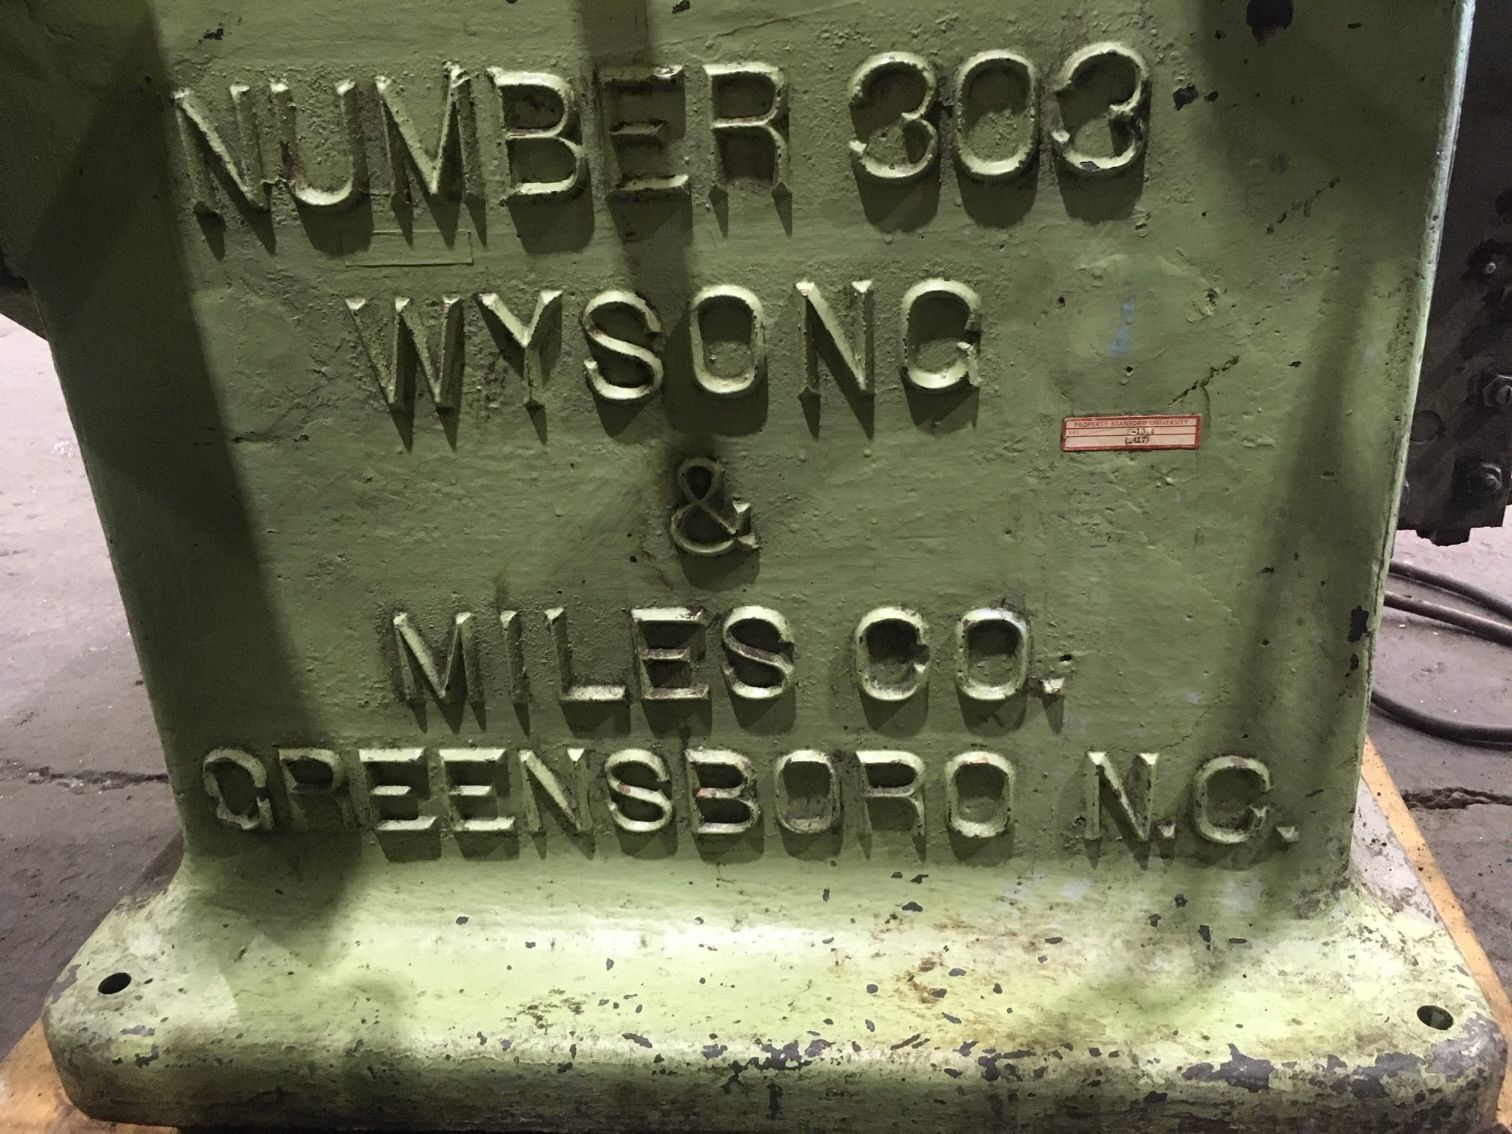 WYSONG & MILES COMPANY NO. 303 Unavailable | MD Equipment Services LLC